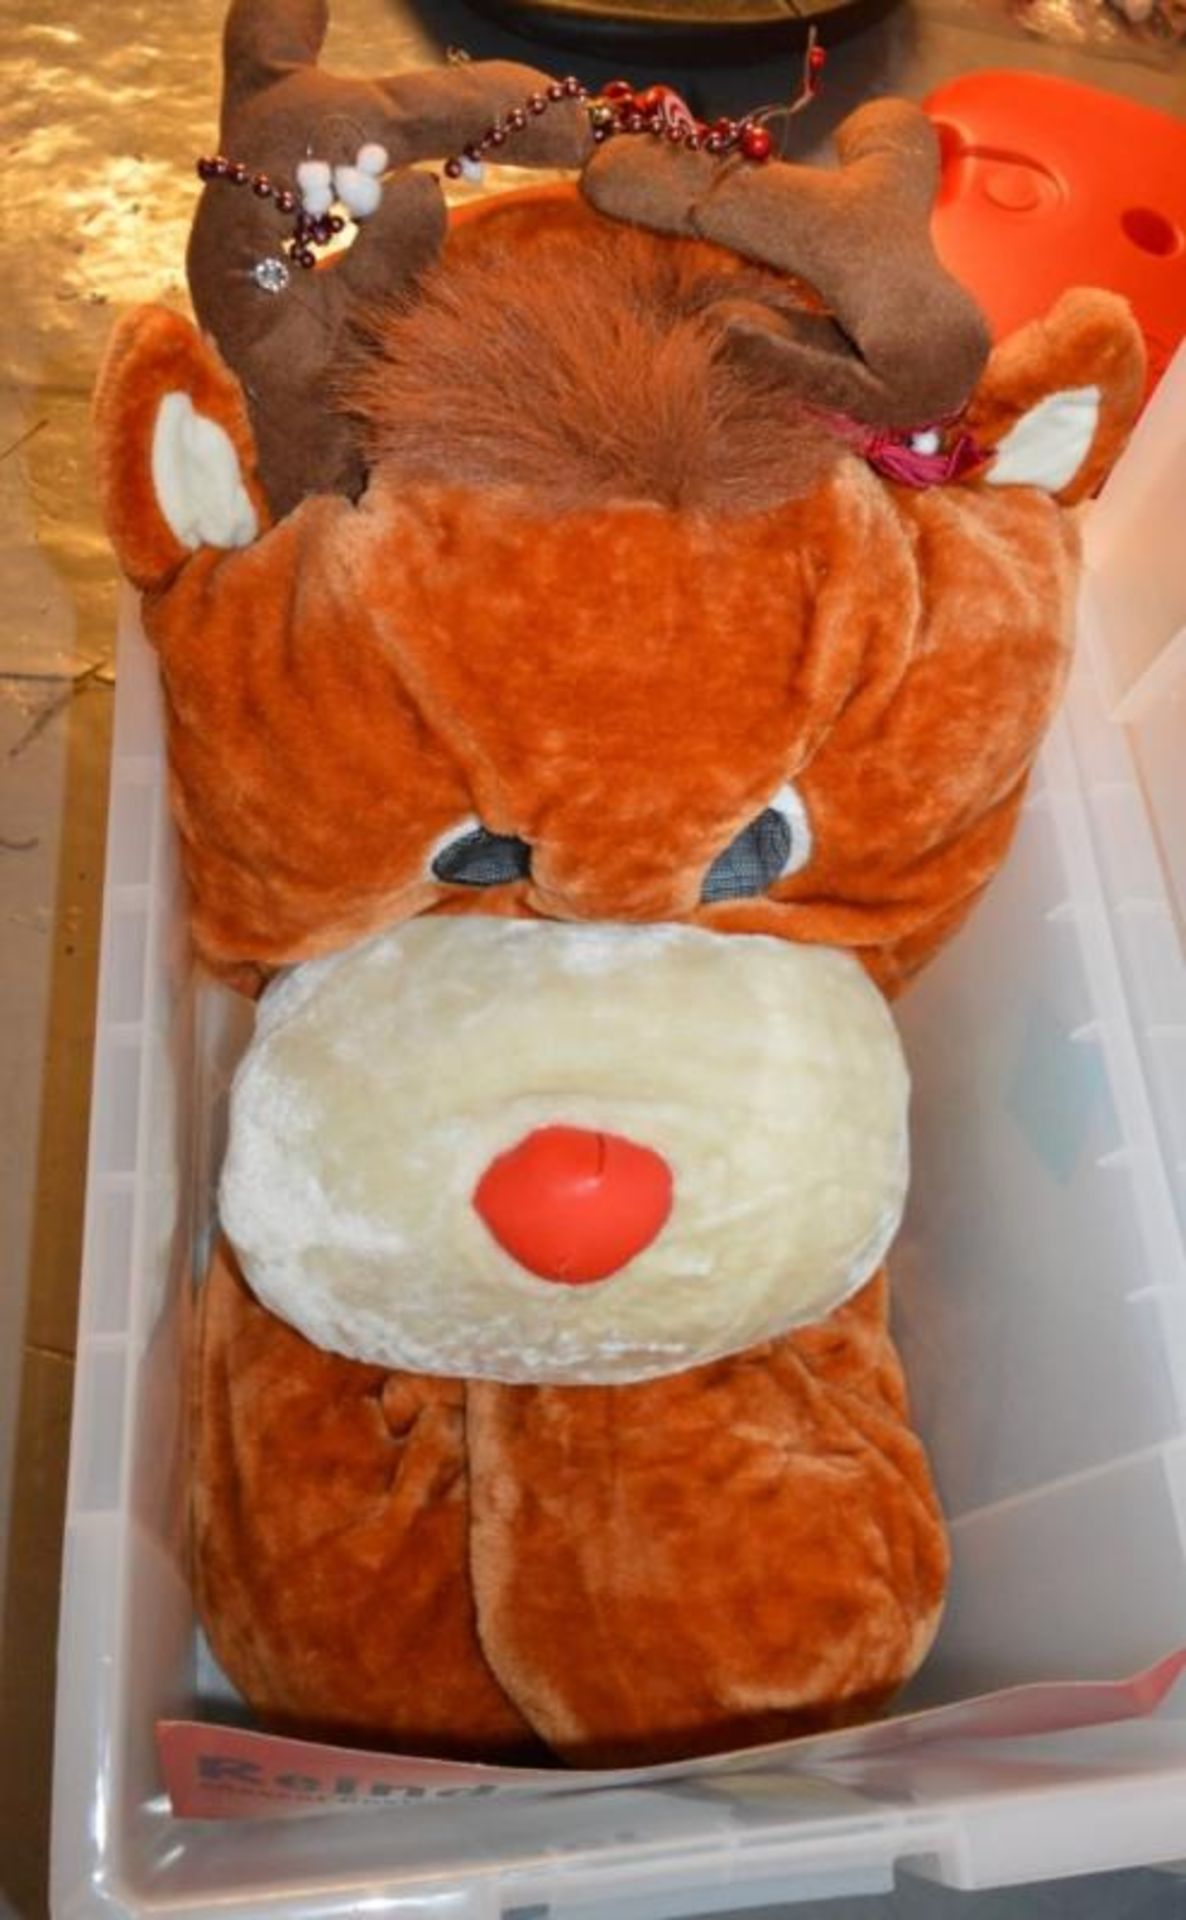 1 x Adult Size Fancy Dress / Mascot REINDEER Costume - Includes Suit, Feet and Head - Very Good Cond